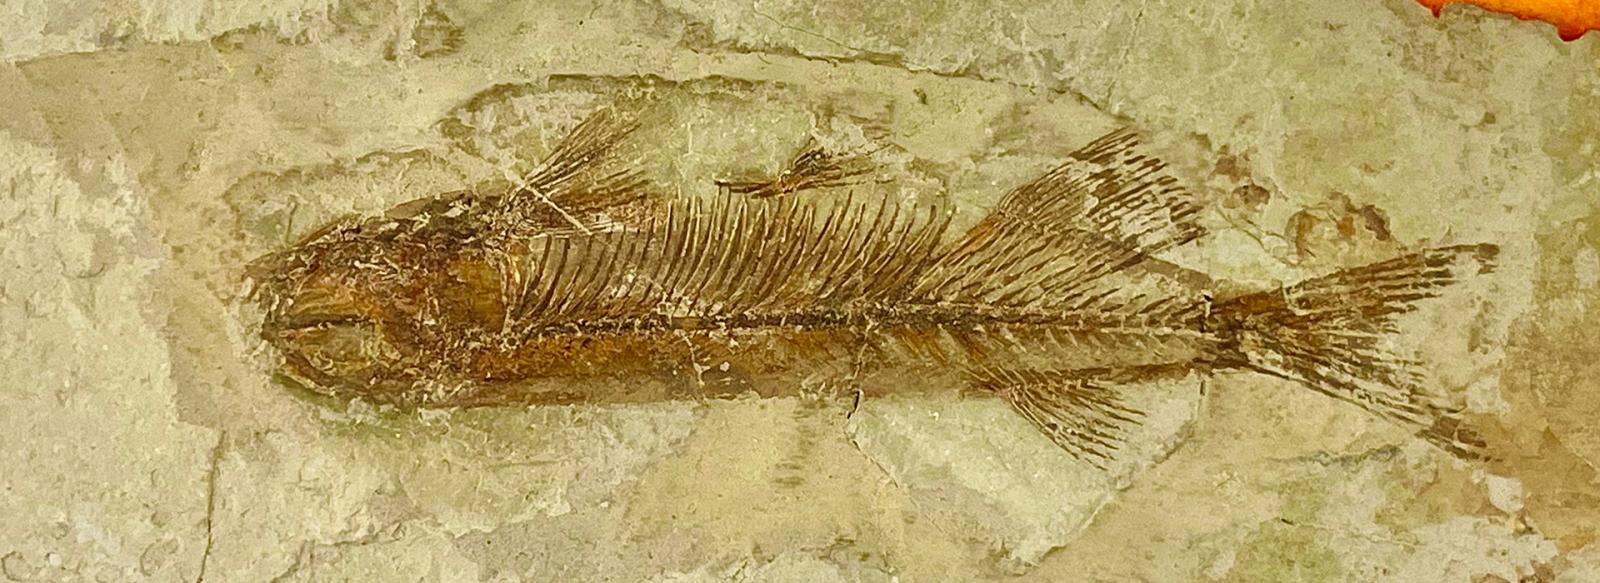 fossil of a fish